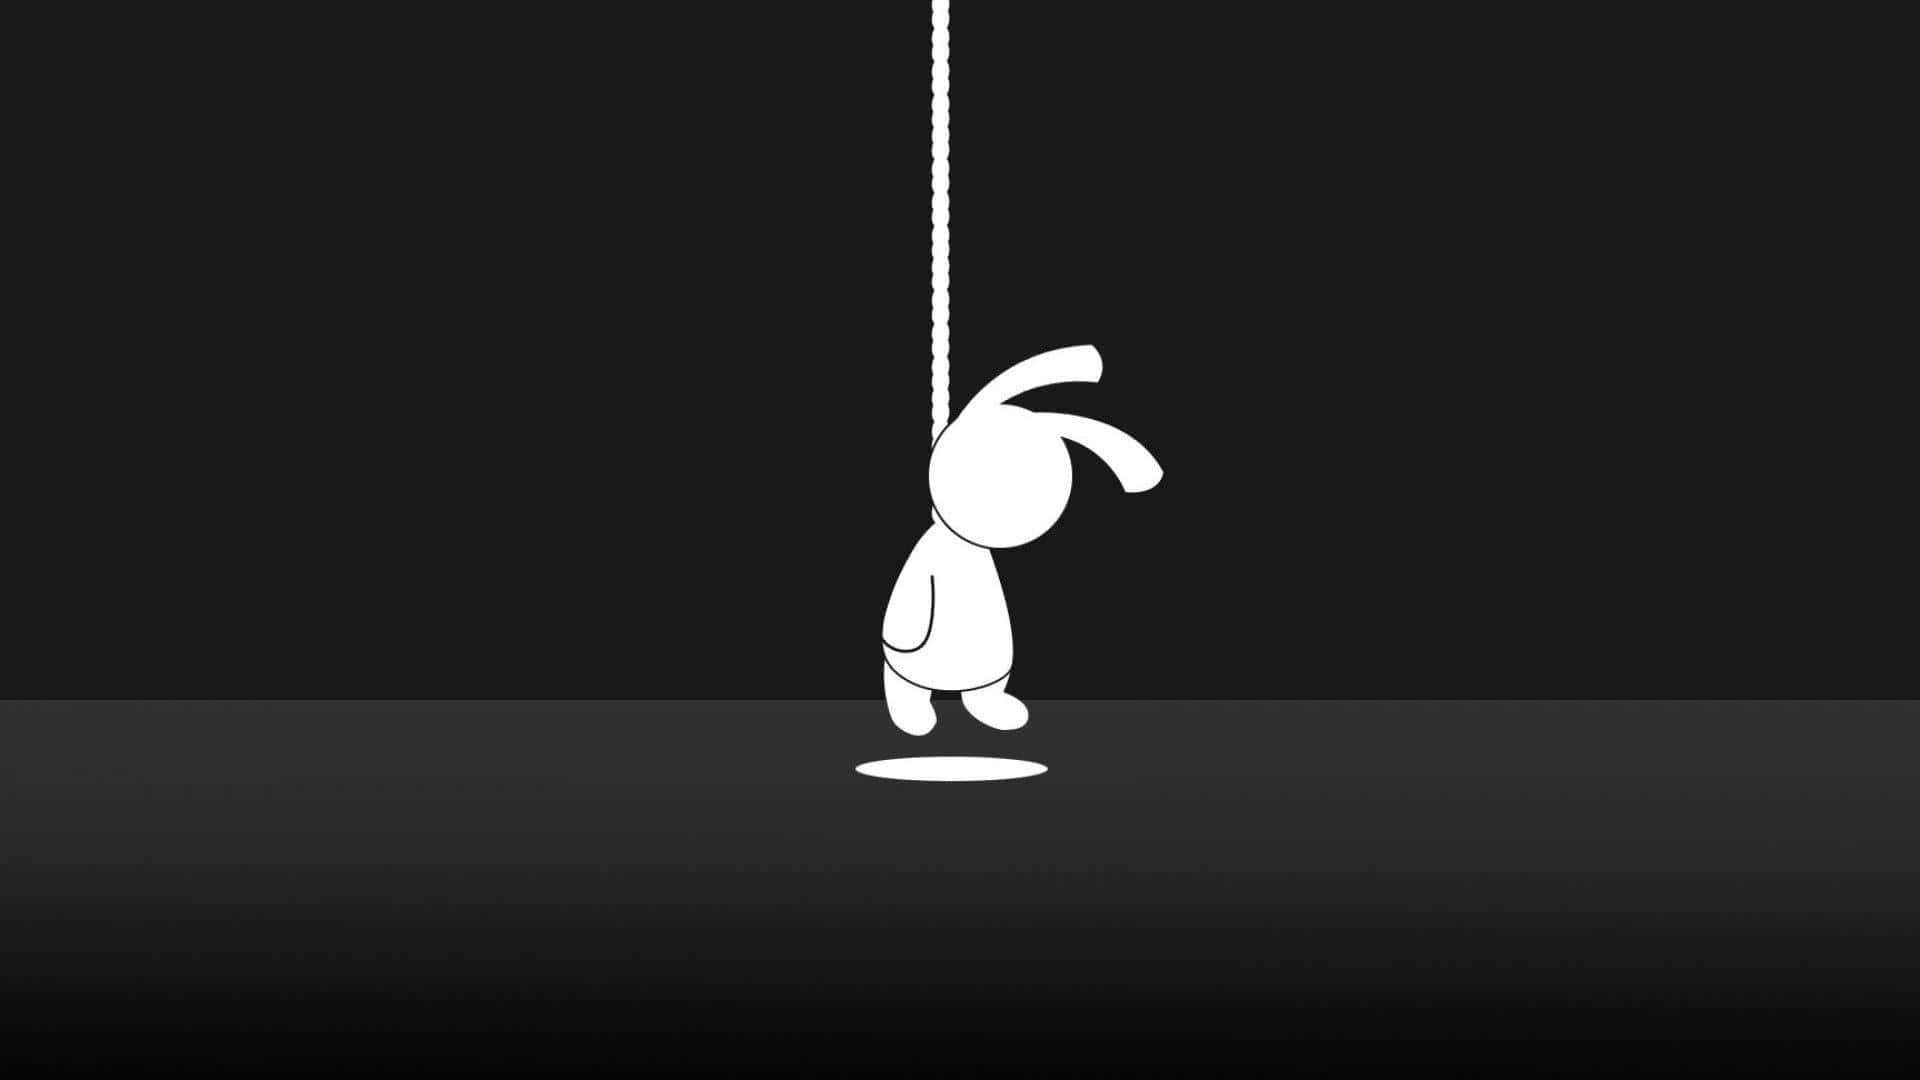 A Black And White Image Of A Rabbit Hanging From A Rope Wallpaper